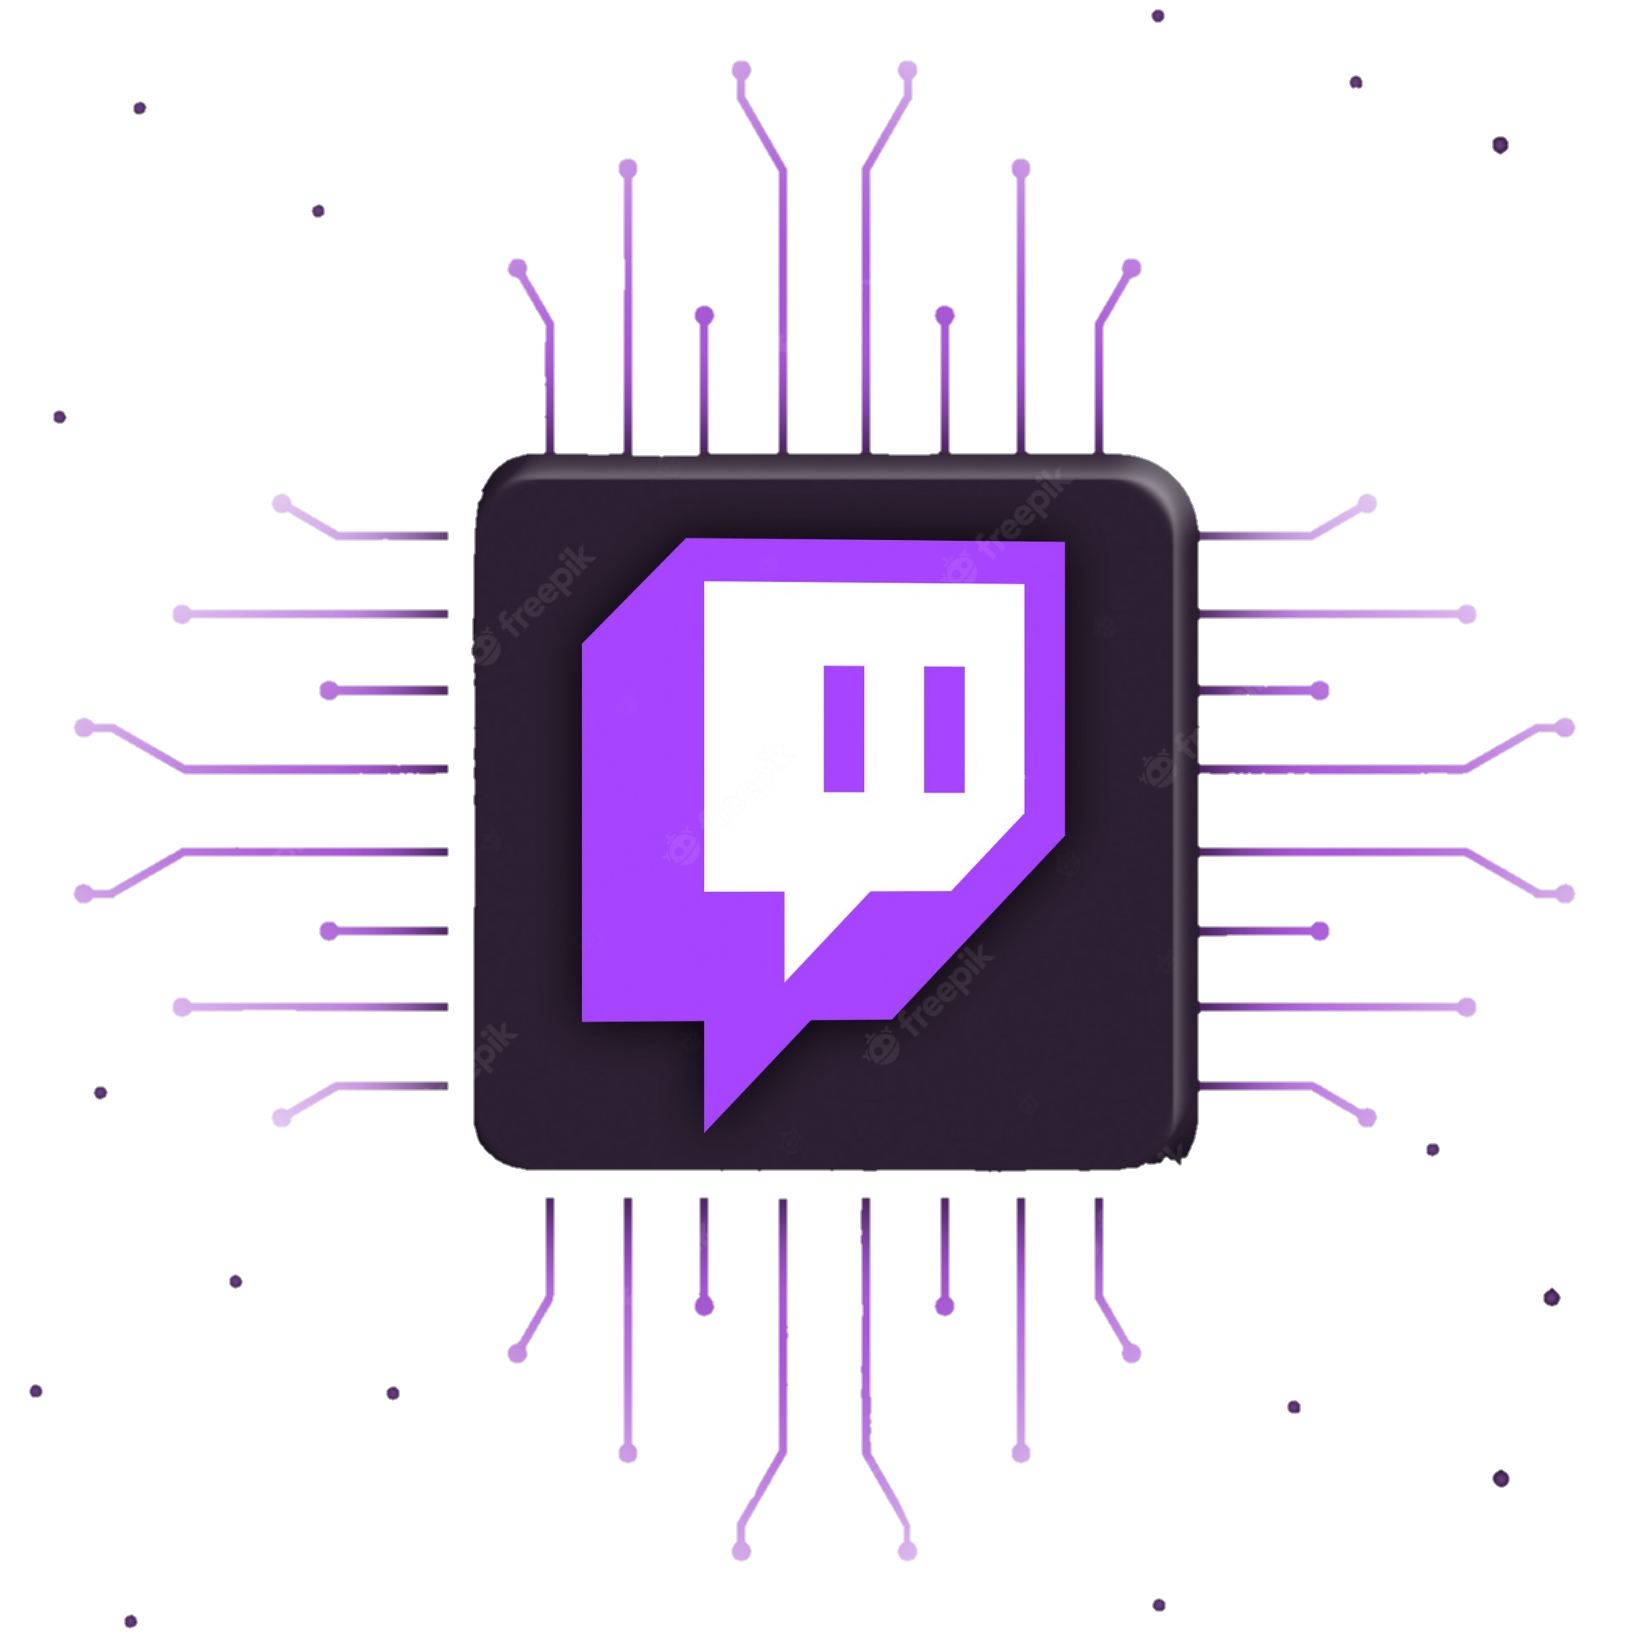 twitch-logo-png-from-pngfre-28